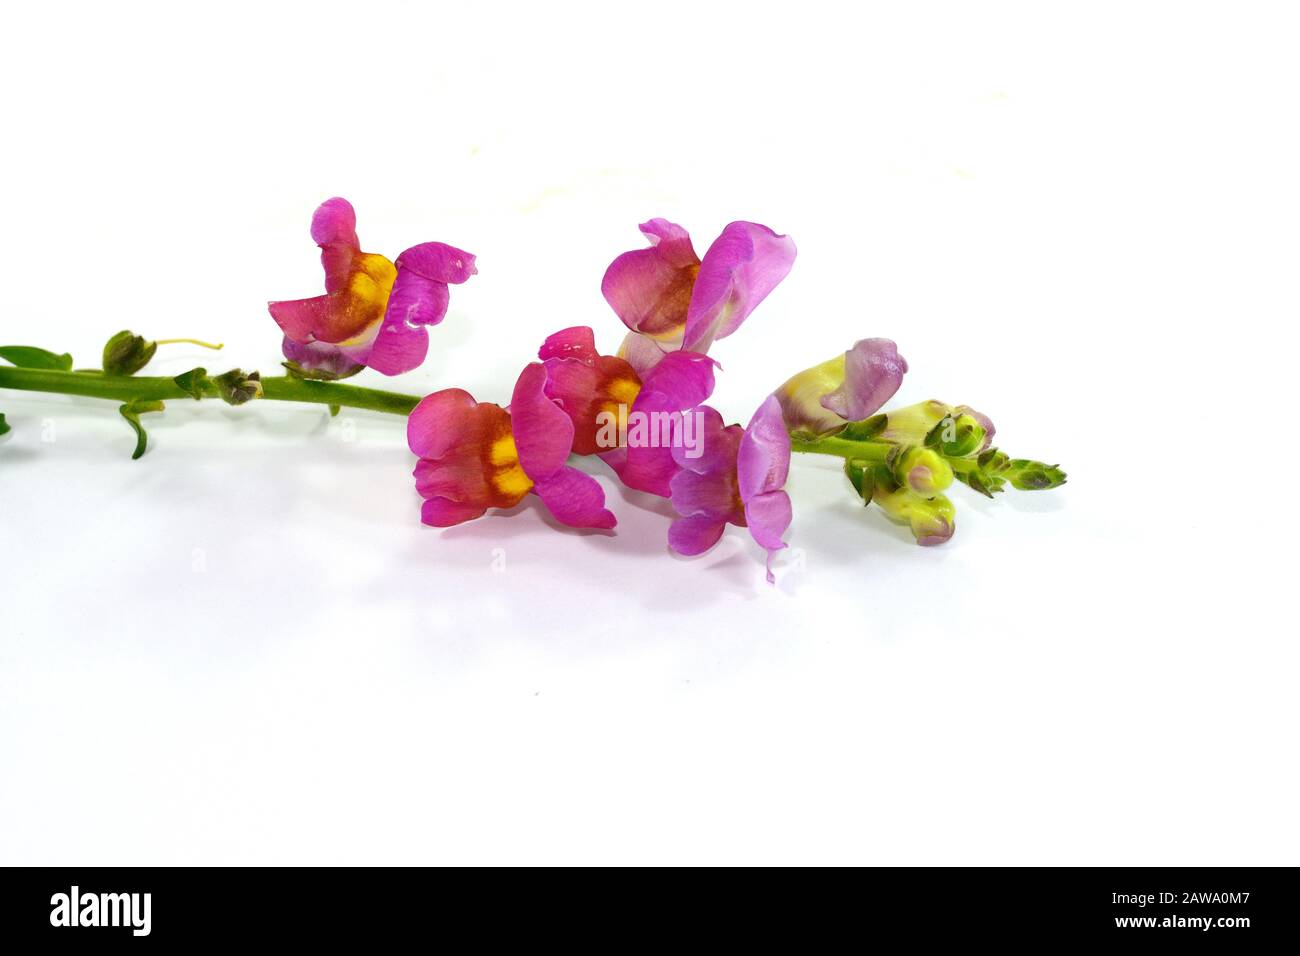 Close-up of yellow, pink and orange flowers of snapdragon (Antirrhinum majus) isolated against a white background Stock Photo